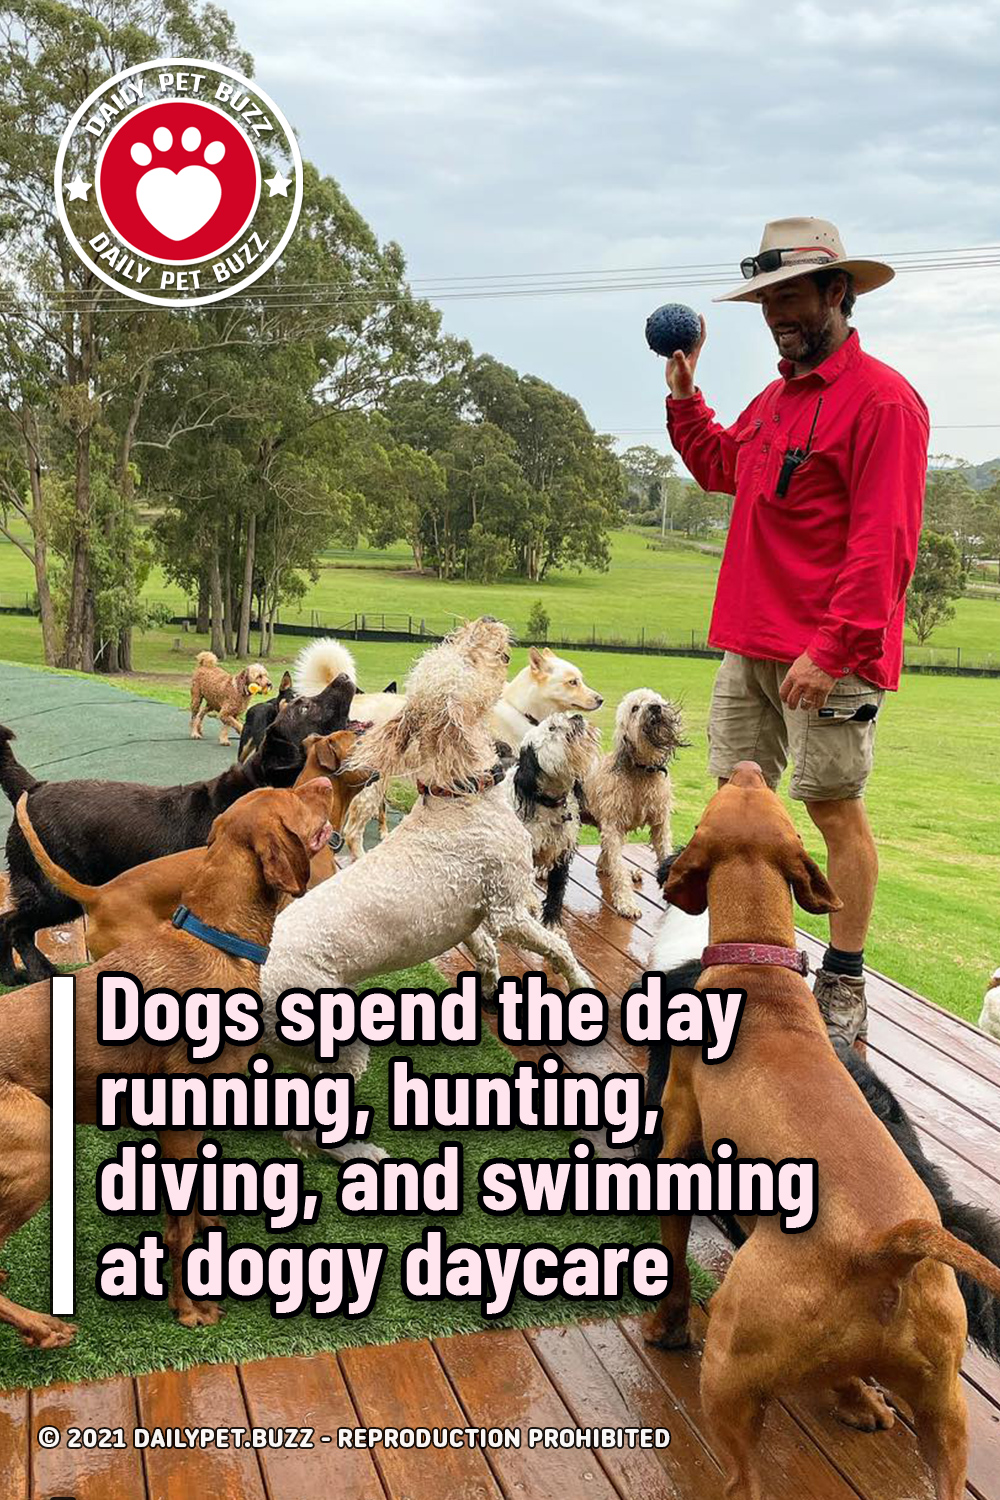 Dogs spend the day running, hunting, diving, and swimming at doggy daycare